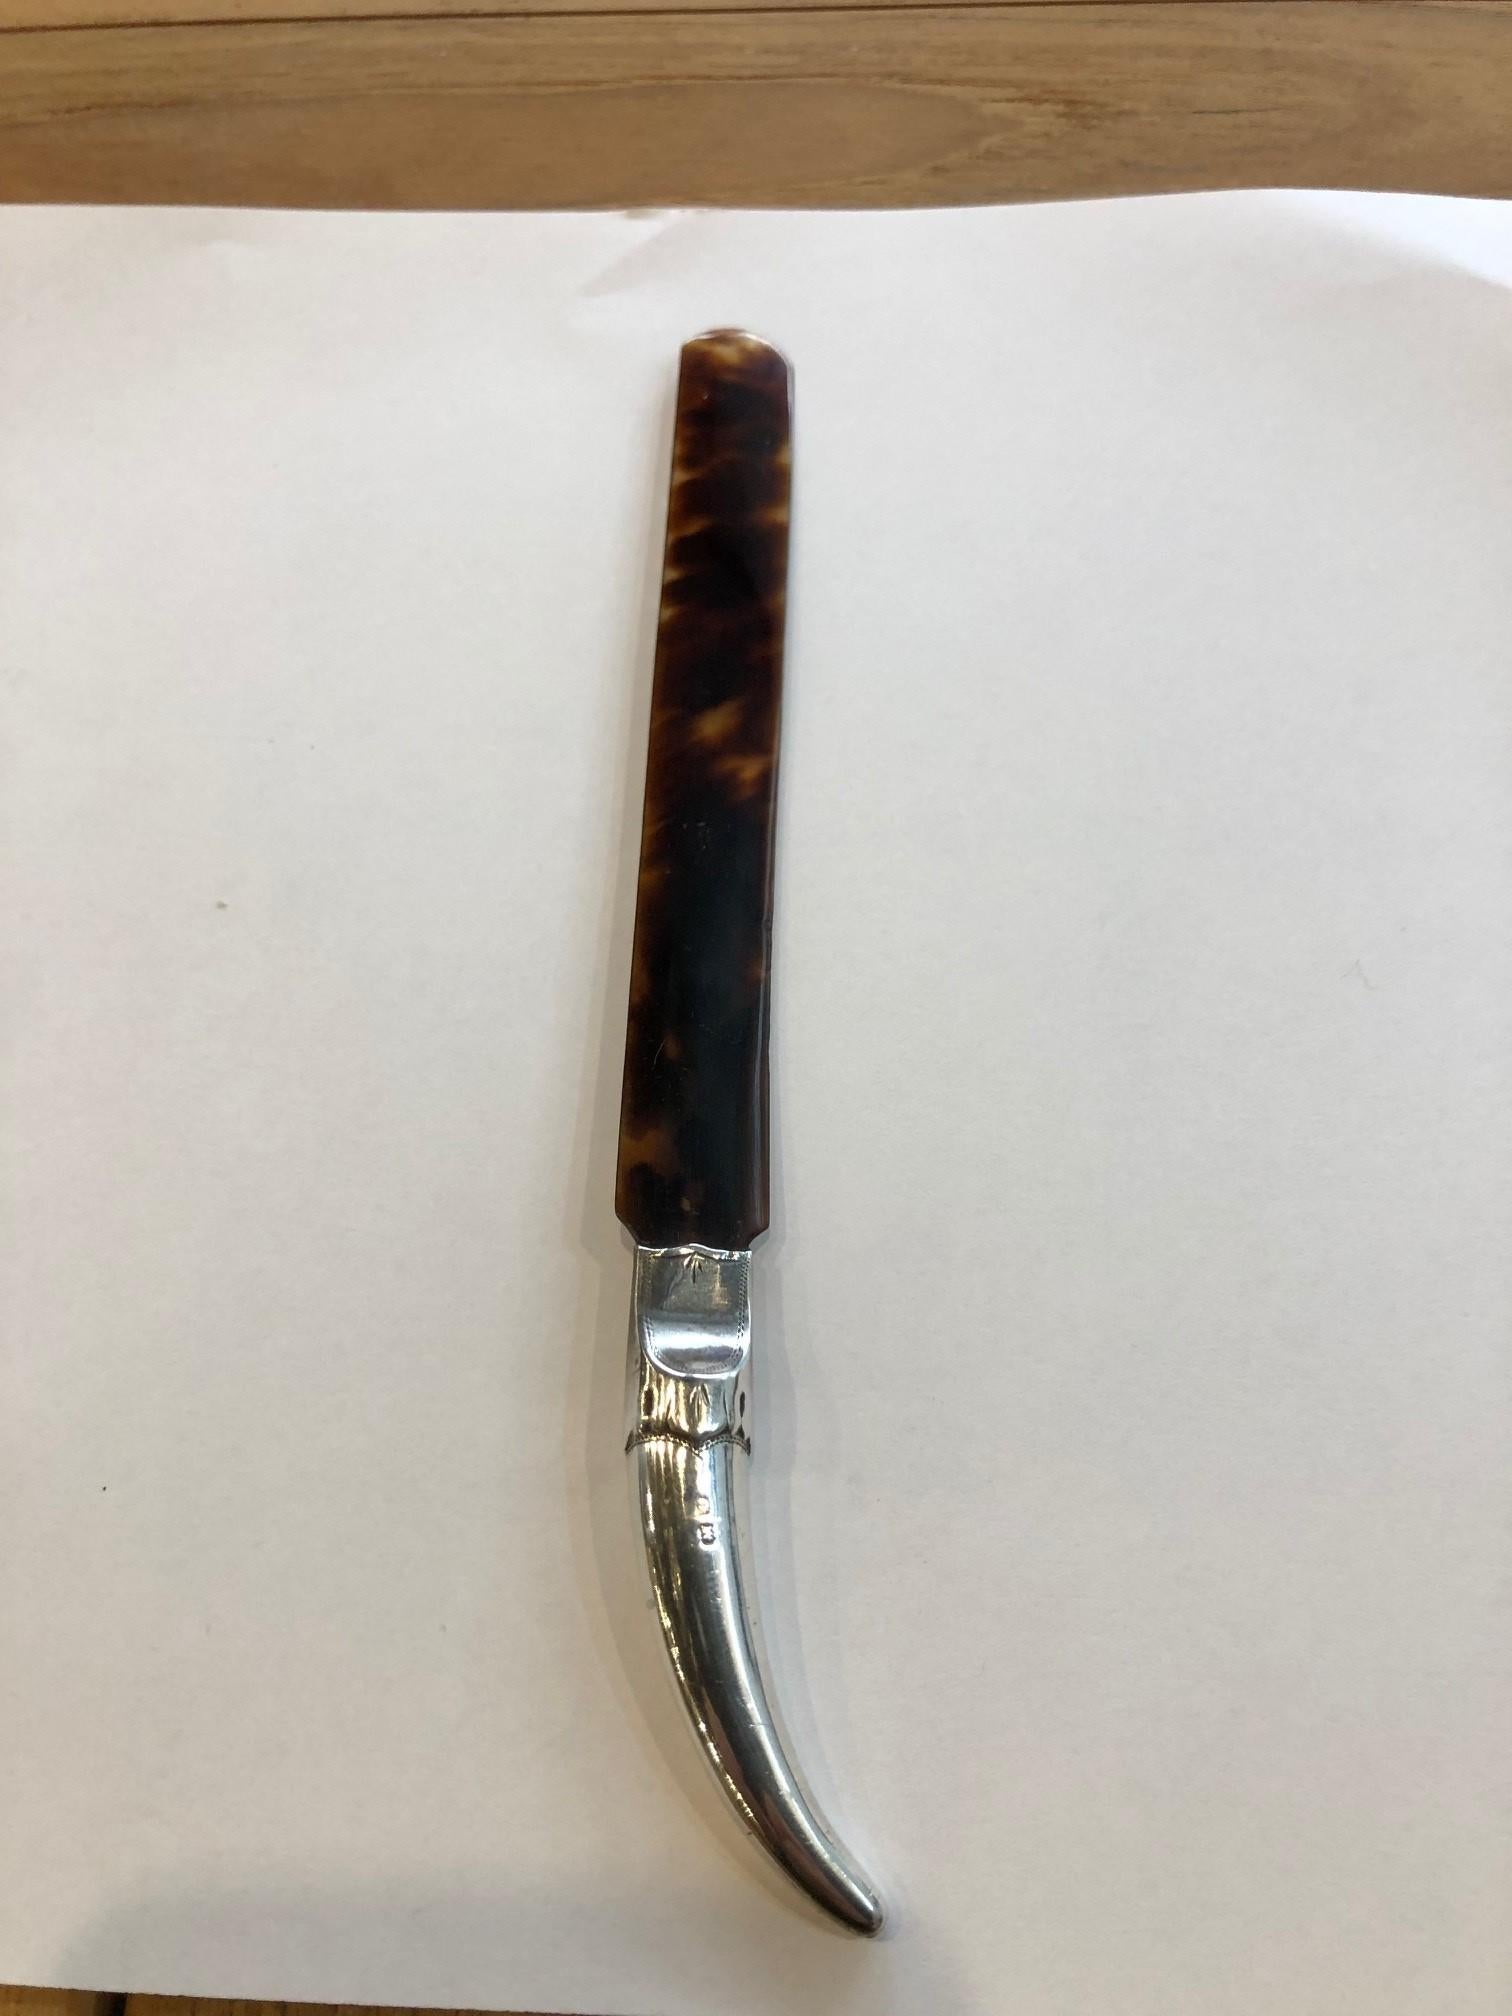 Simply amazing Tortoise Shell letter opener with a sterling silver handle one of the best I have seen. Its a very beautiful looking piece and in one of the photos shows the tortoise shell with light behind it and the colors are amazing. This is from